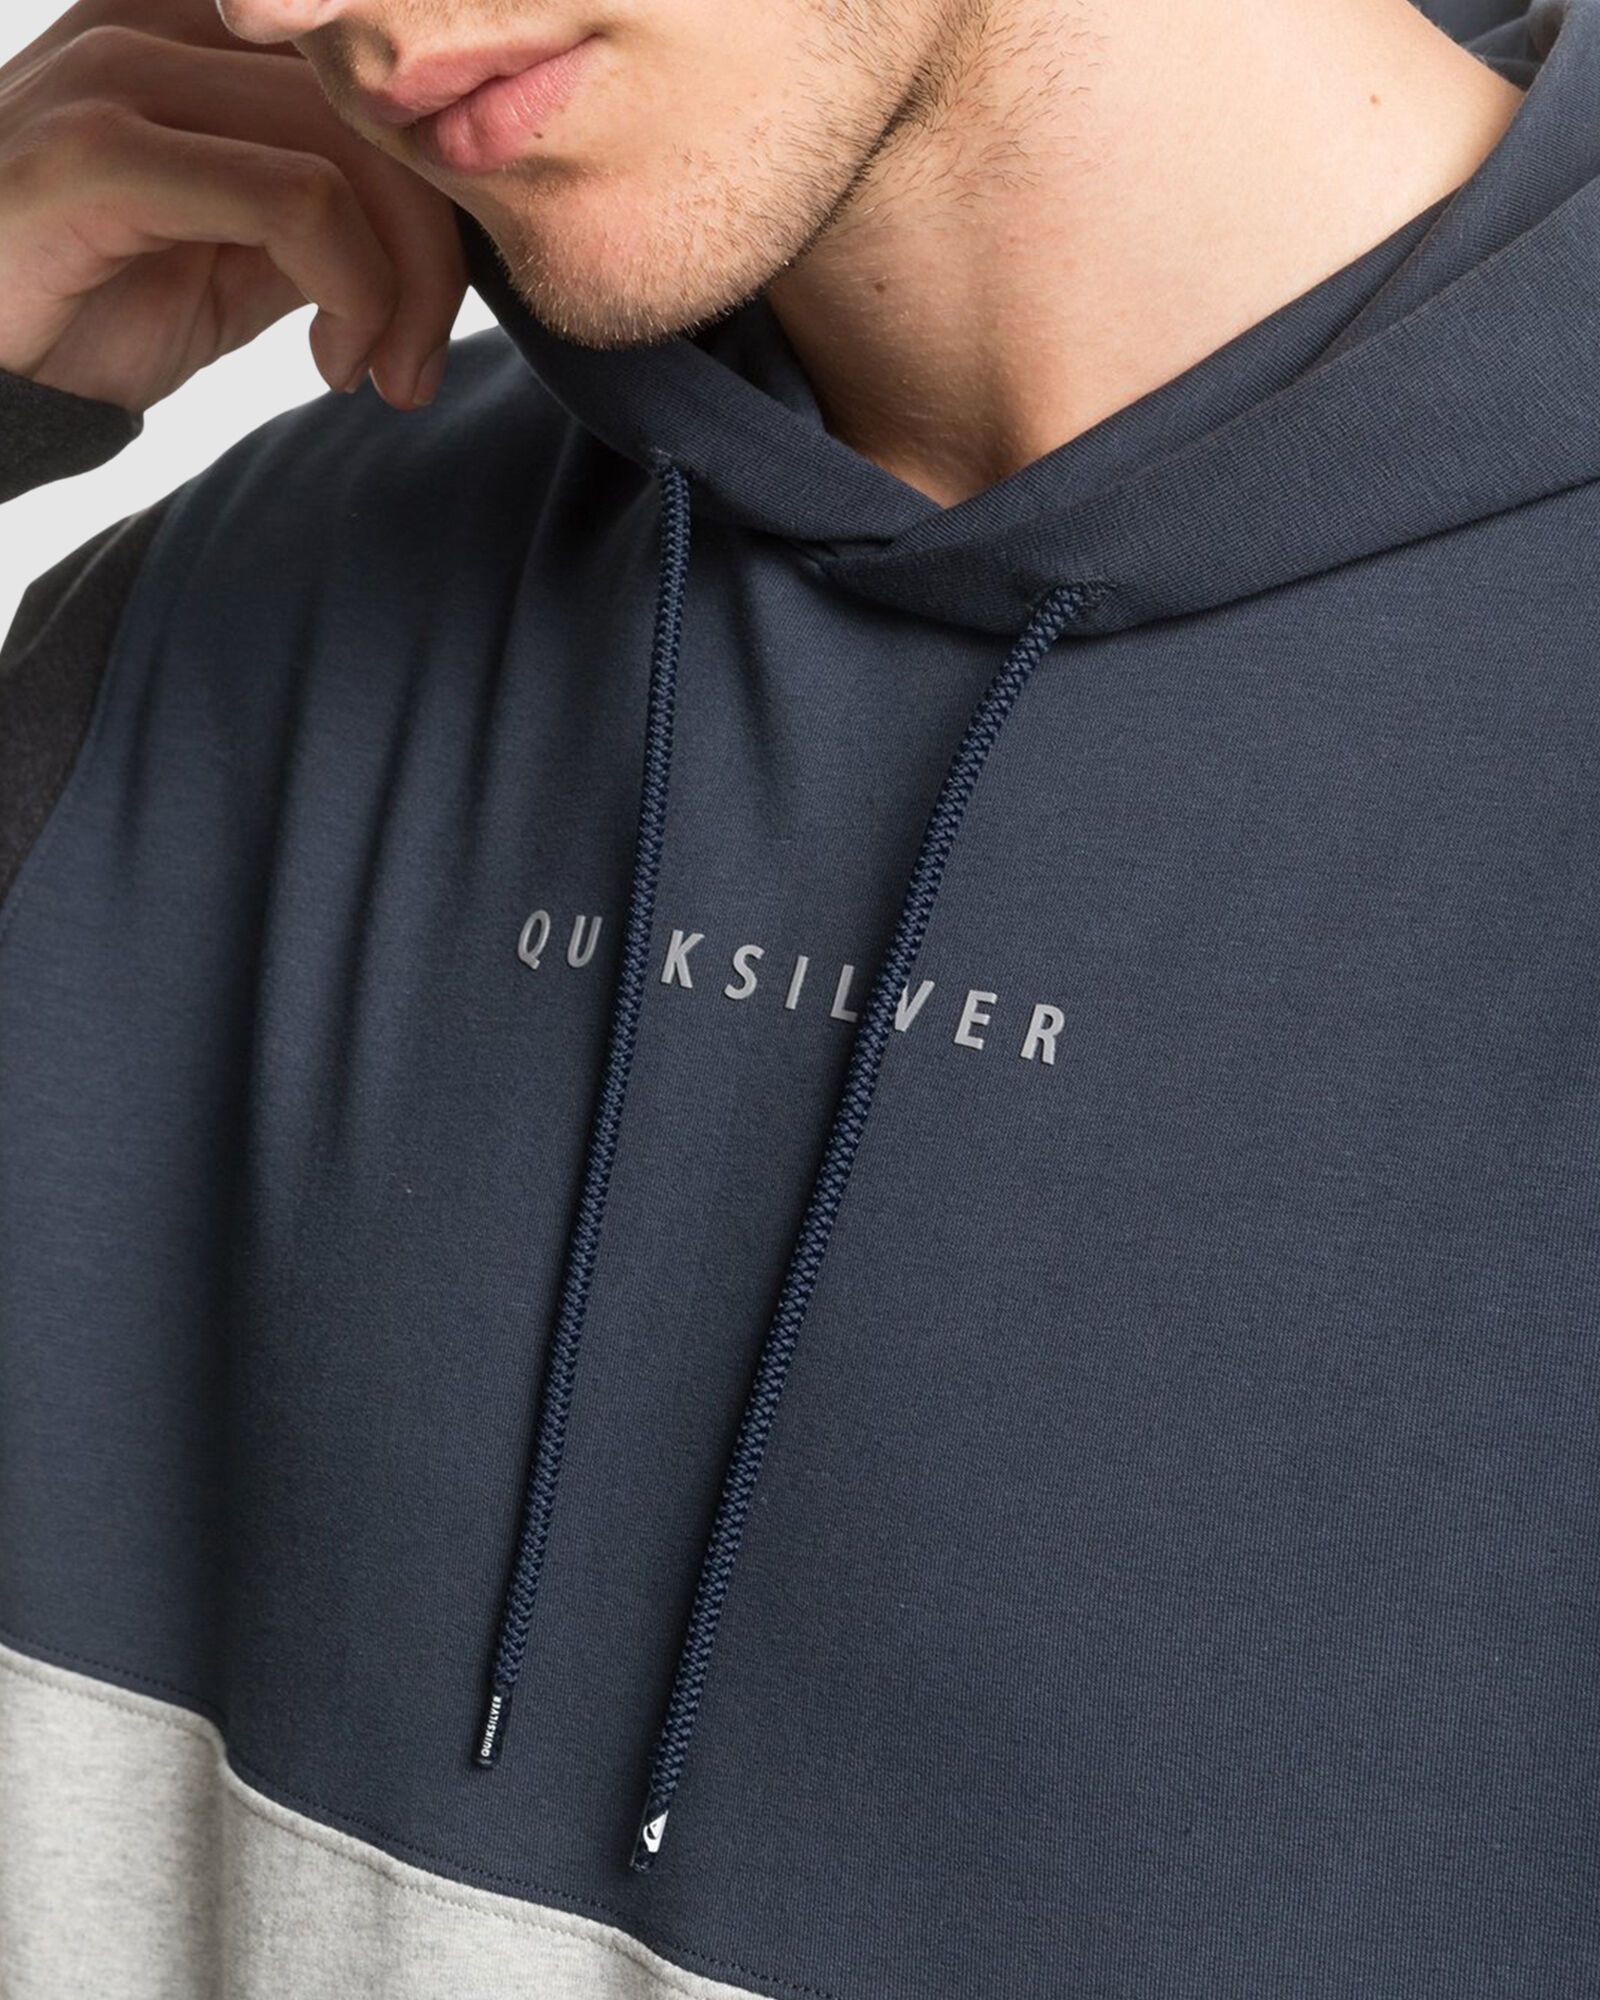 Quiksilver Under Shelter Hood Update Pullover Hoody in Blue Nights 